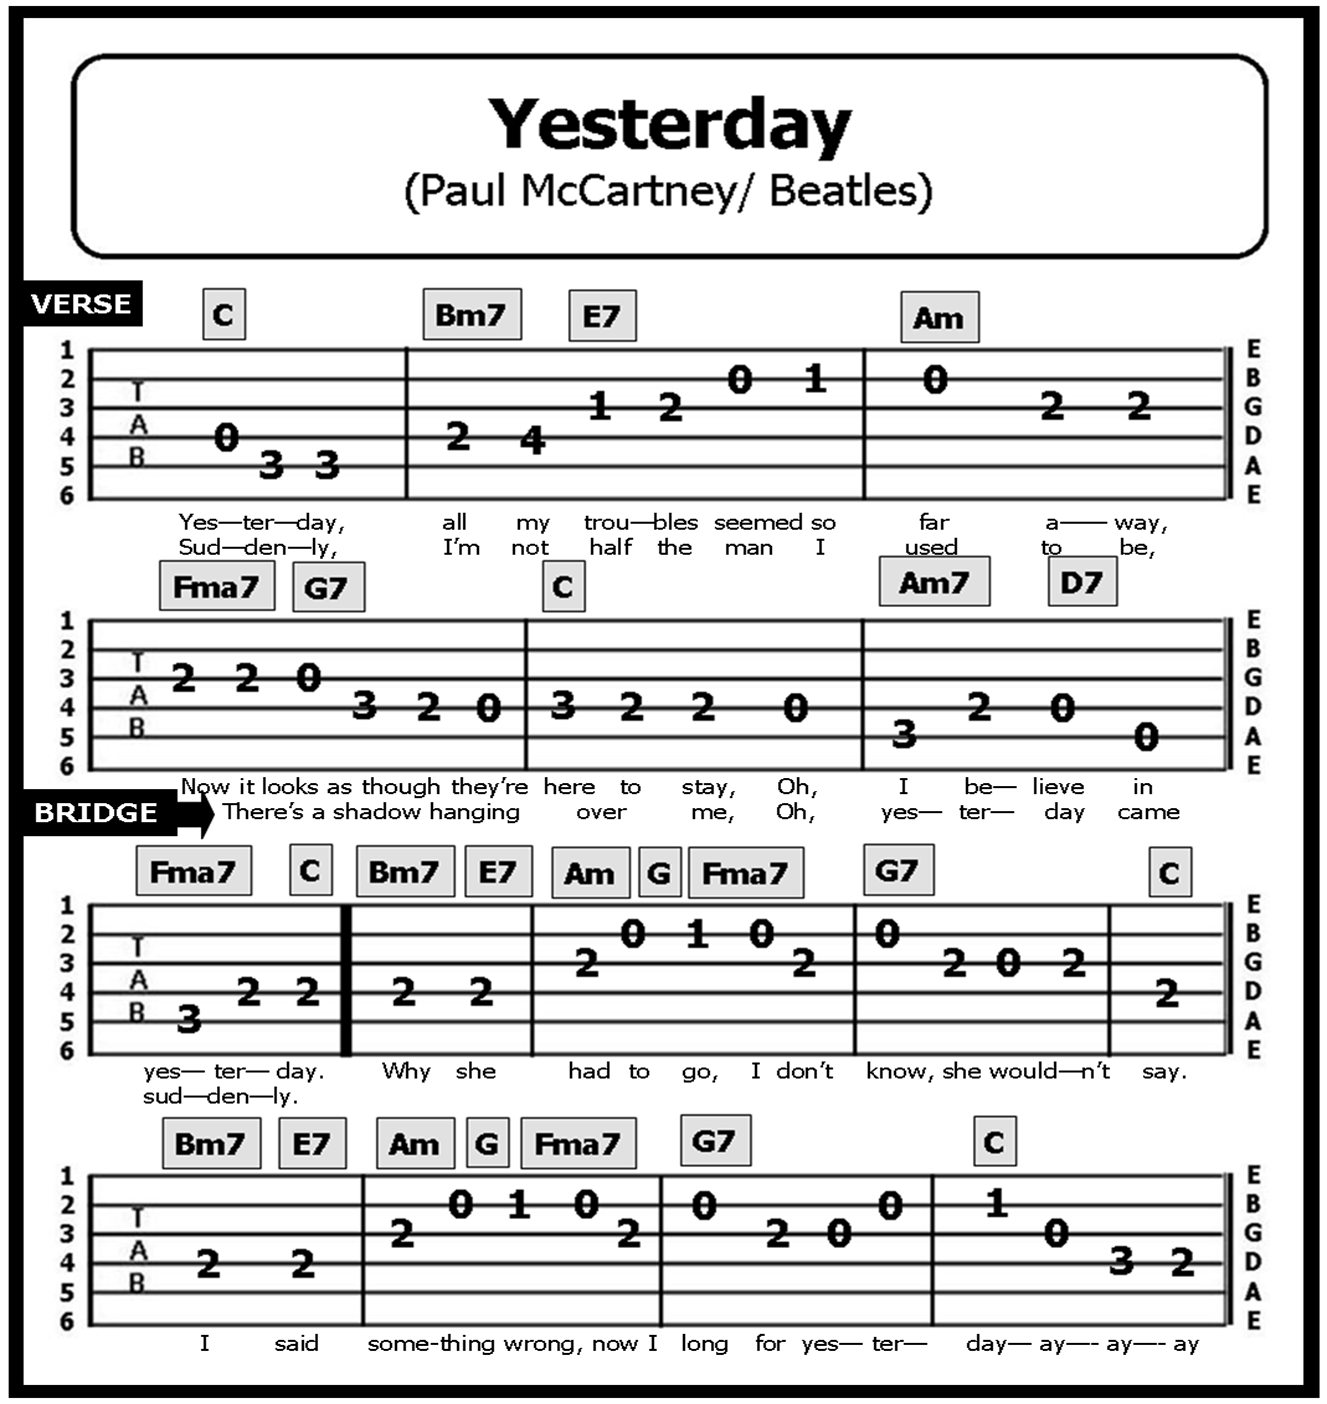 Guitar Tab Songs Yesterday 21606 | Hot Sex Picture